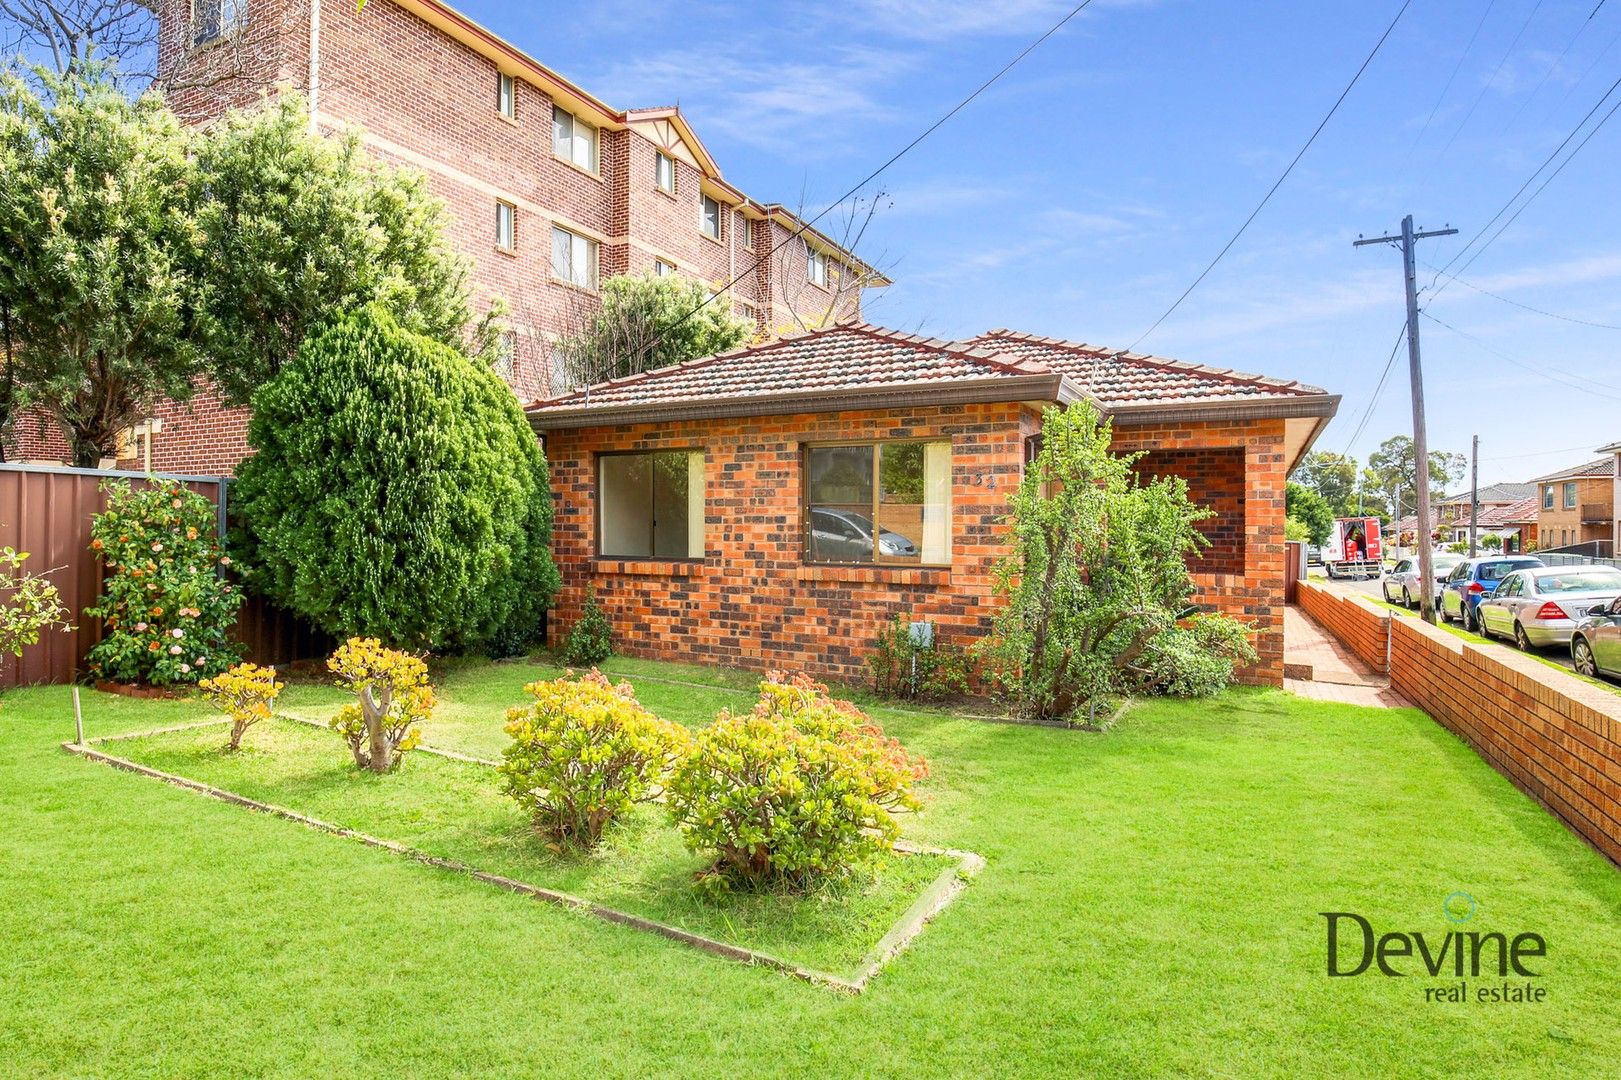 4 bedrooms House in 32 Mary Street LIDCOMBE NSW, 2141